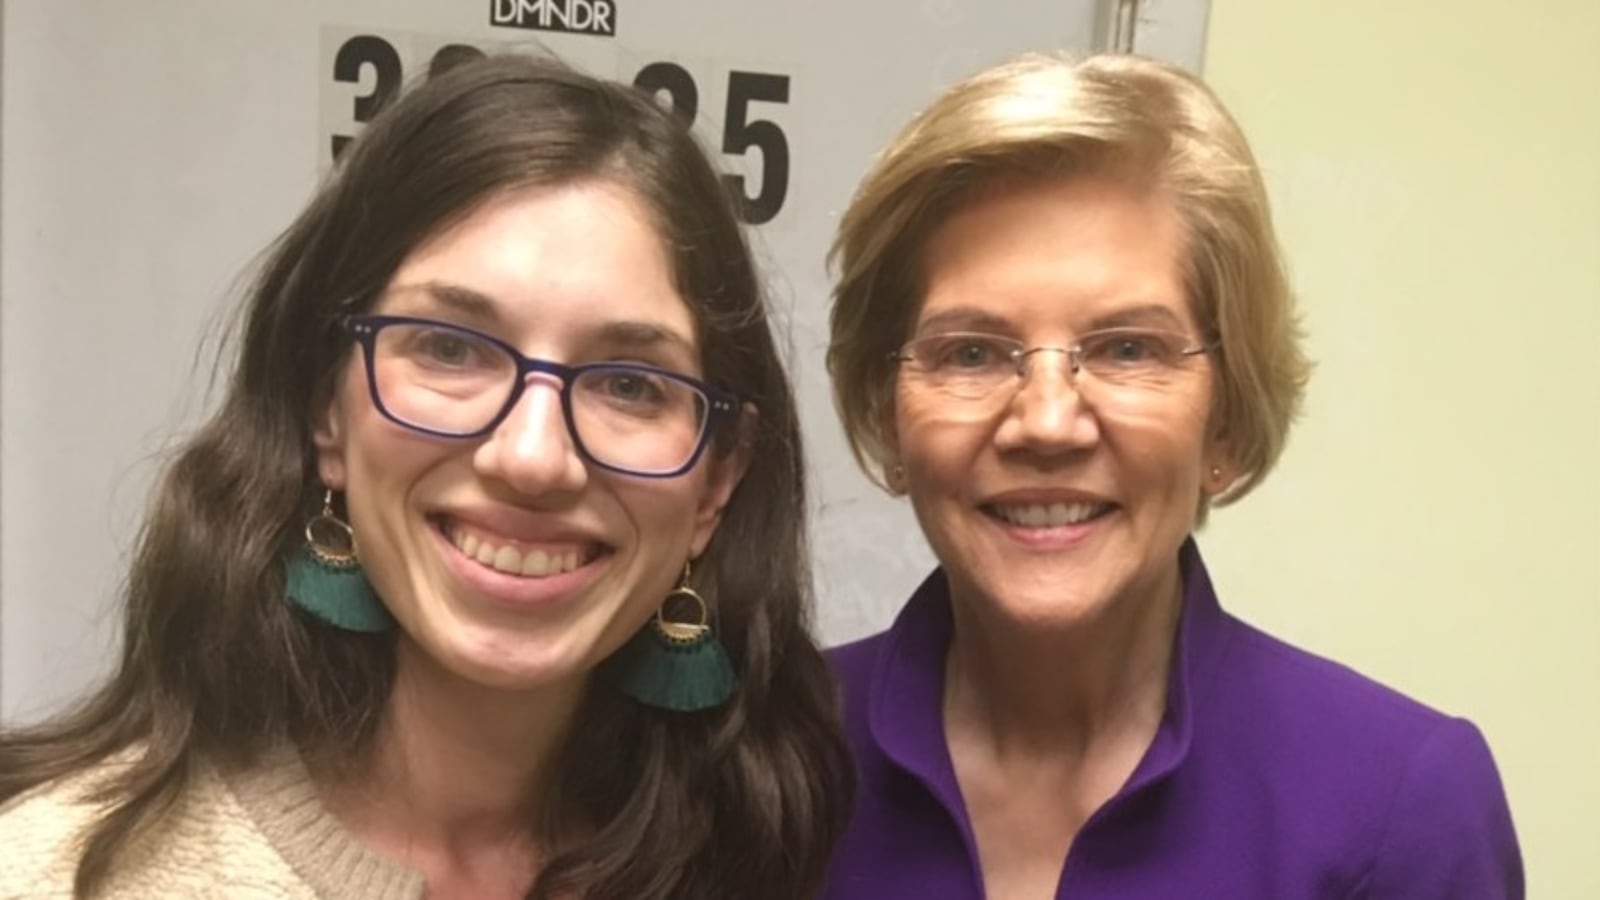 Liat Olenick, left, with Democratic presidential candidate Elizabeth Warren in March. Olenick's advocacy resulted in Warren committing publicly to select a public school educator as U.S. education secretary if elected.